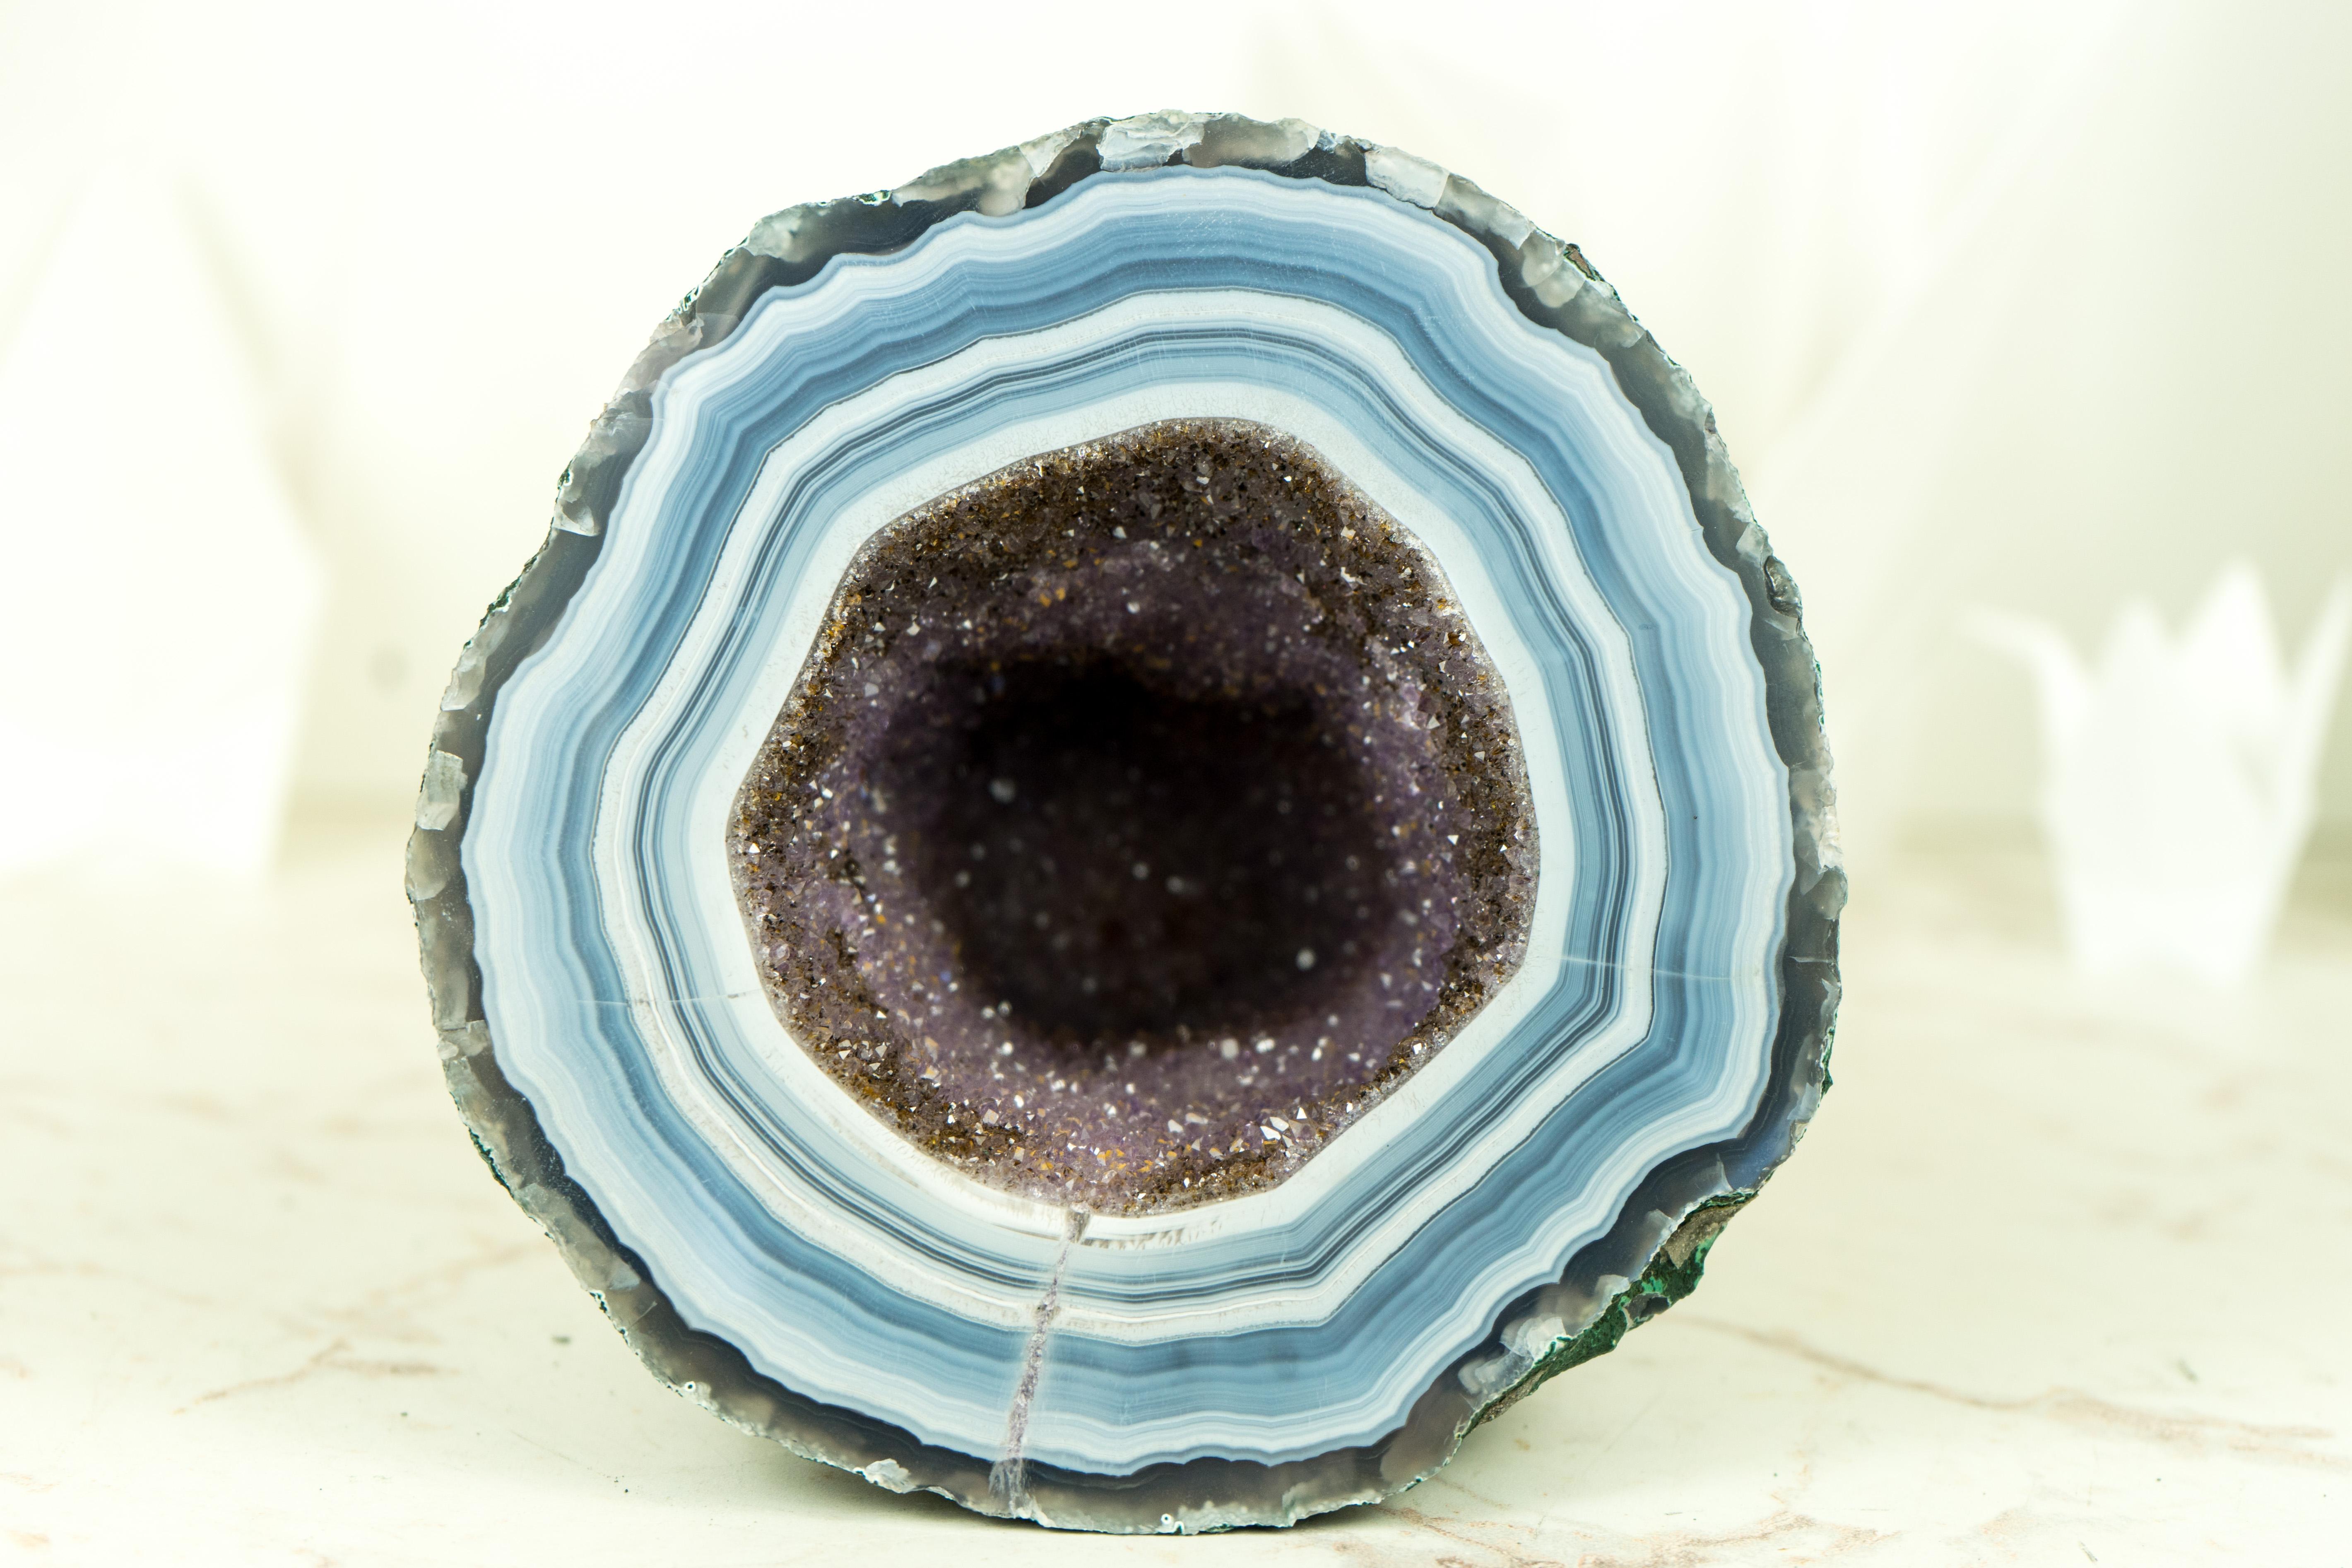 A small but Spectacular and attractive Amethyst with Agate Geode, this small beauty is filled with large, deep purple amethyst crystals with the rare Golden Goethite, making it a truly unique and valuable find. With its high-end, super extra